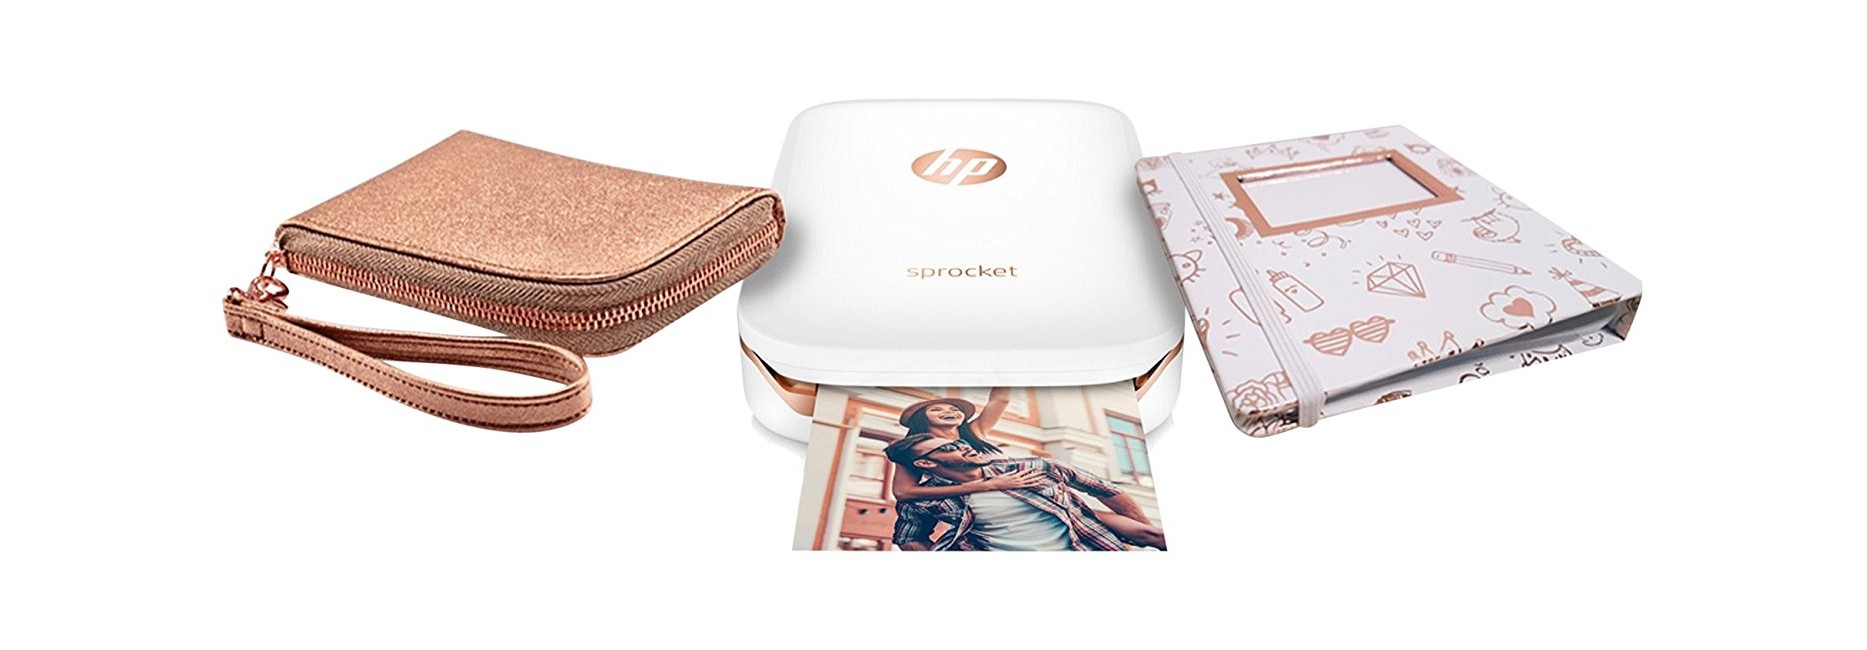 HP Sprocket Photo Printer Limited Edition, White and Rose Gold Gift Set